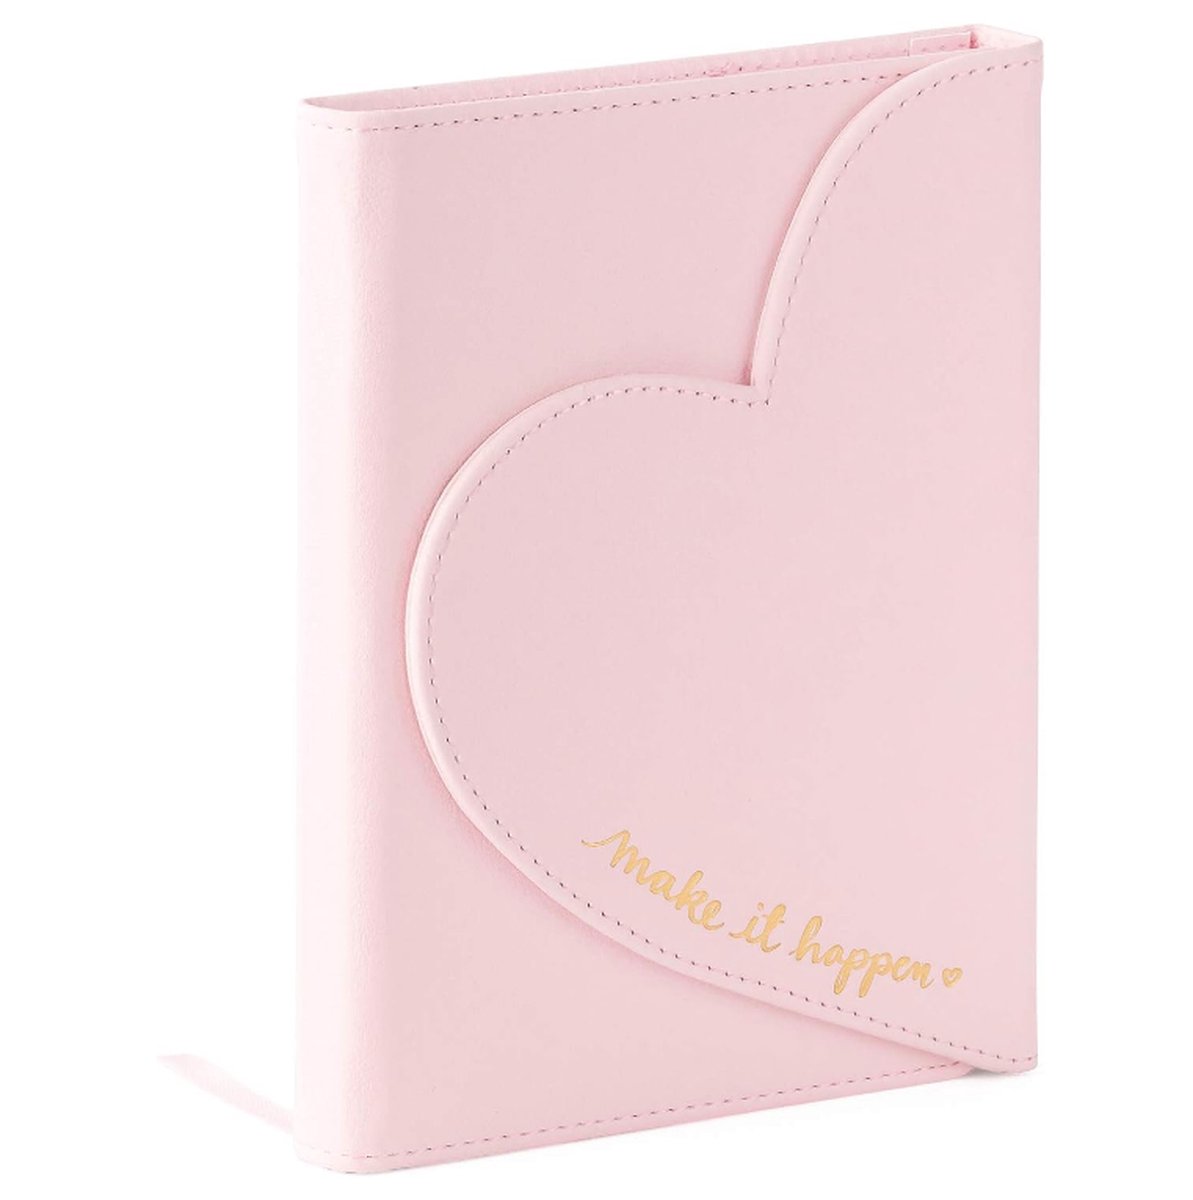 Eccolo Dayna Lee Love Journal & Notebook With Magnetic Heart Flap, 256 Acid-Free Ruled Pages (Light Pink - Make It Happen) - 13.97x17.78cm